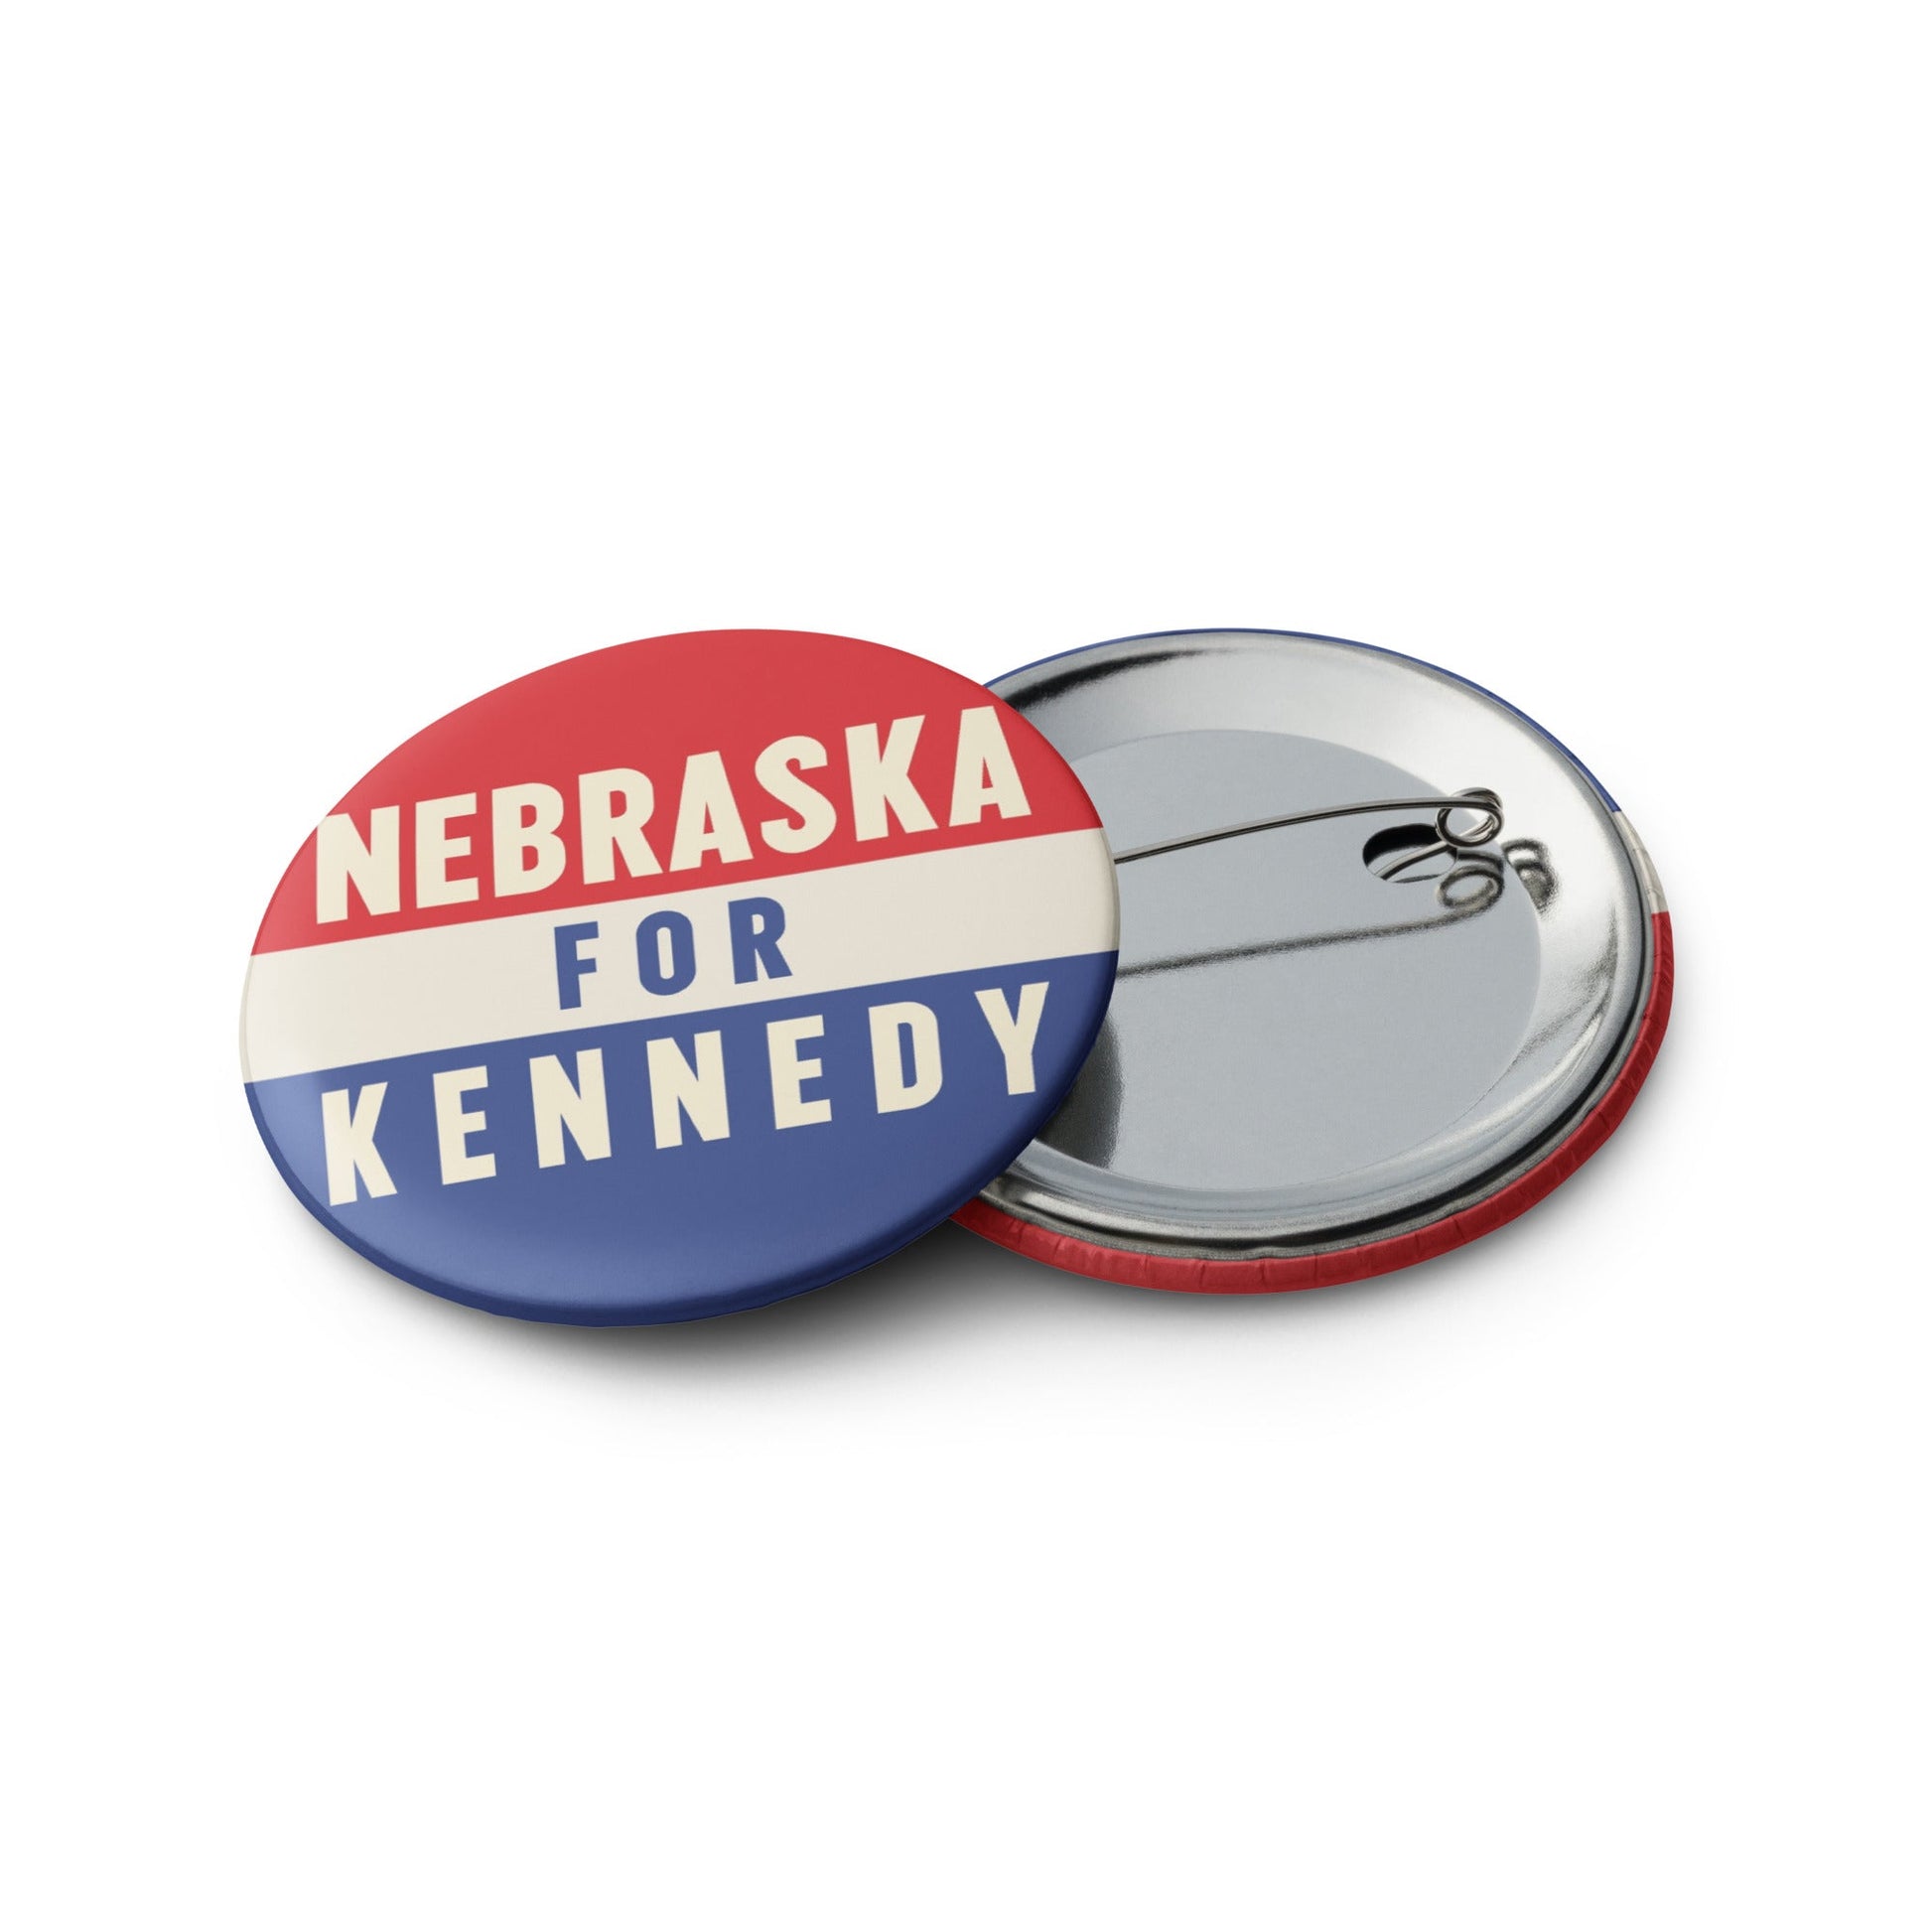 Nebraska for Kennedy (5 Buttons) - TEAM KENNEDY. All rights reserved